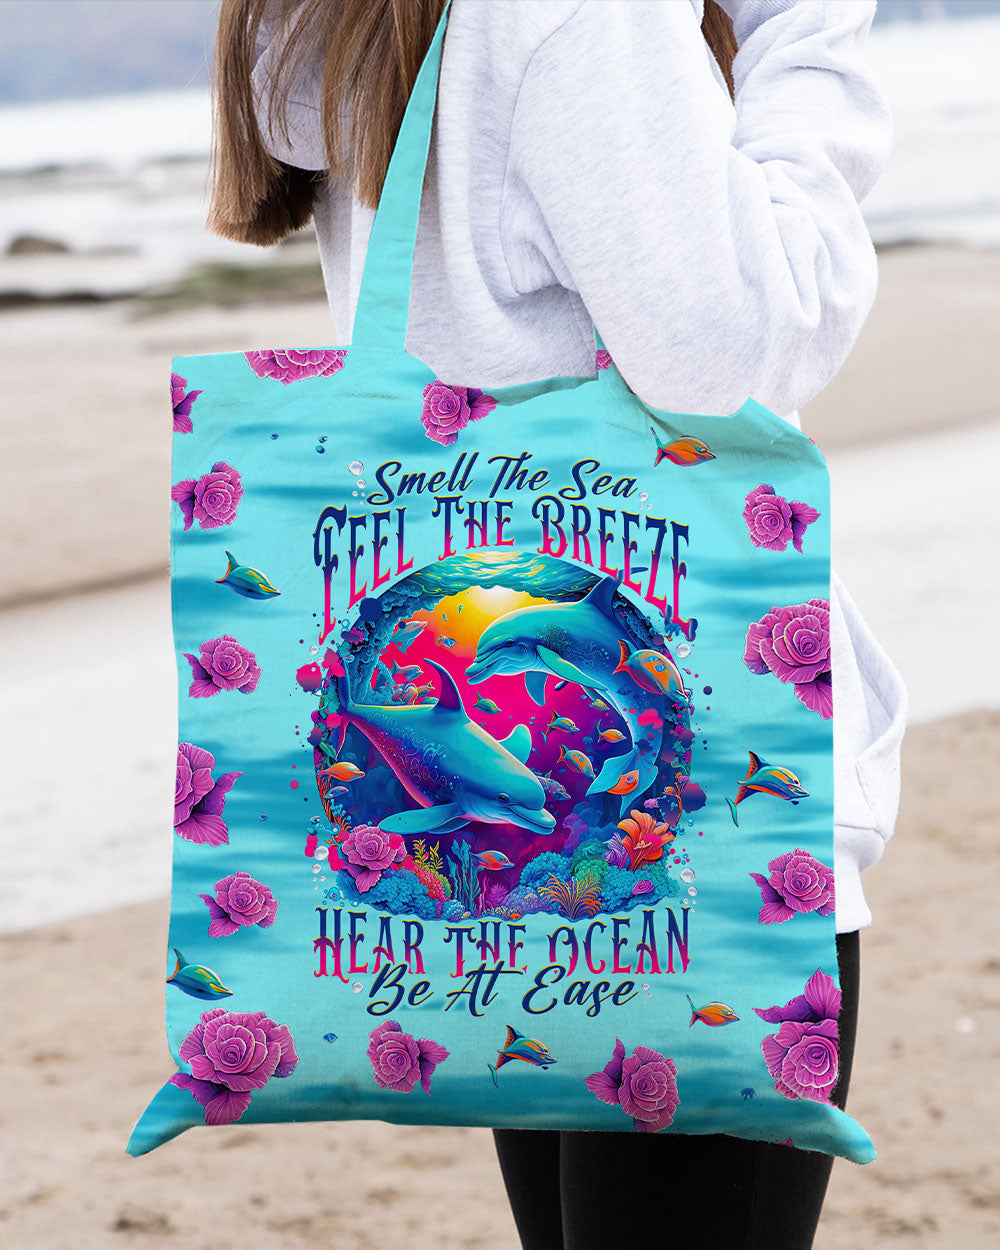 SMELL THE SEA FEEL THE BREEZE DOLPHIN TOTE BAG - TLNT0809235